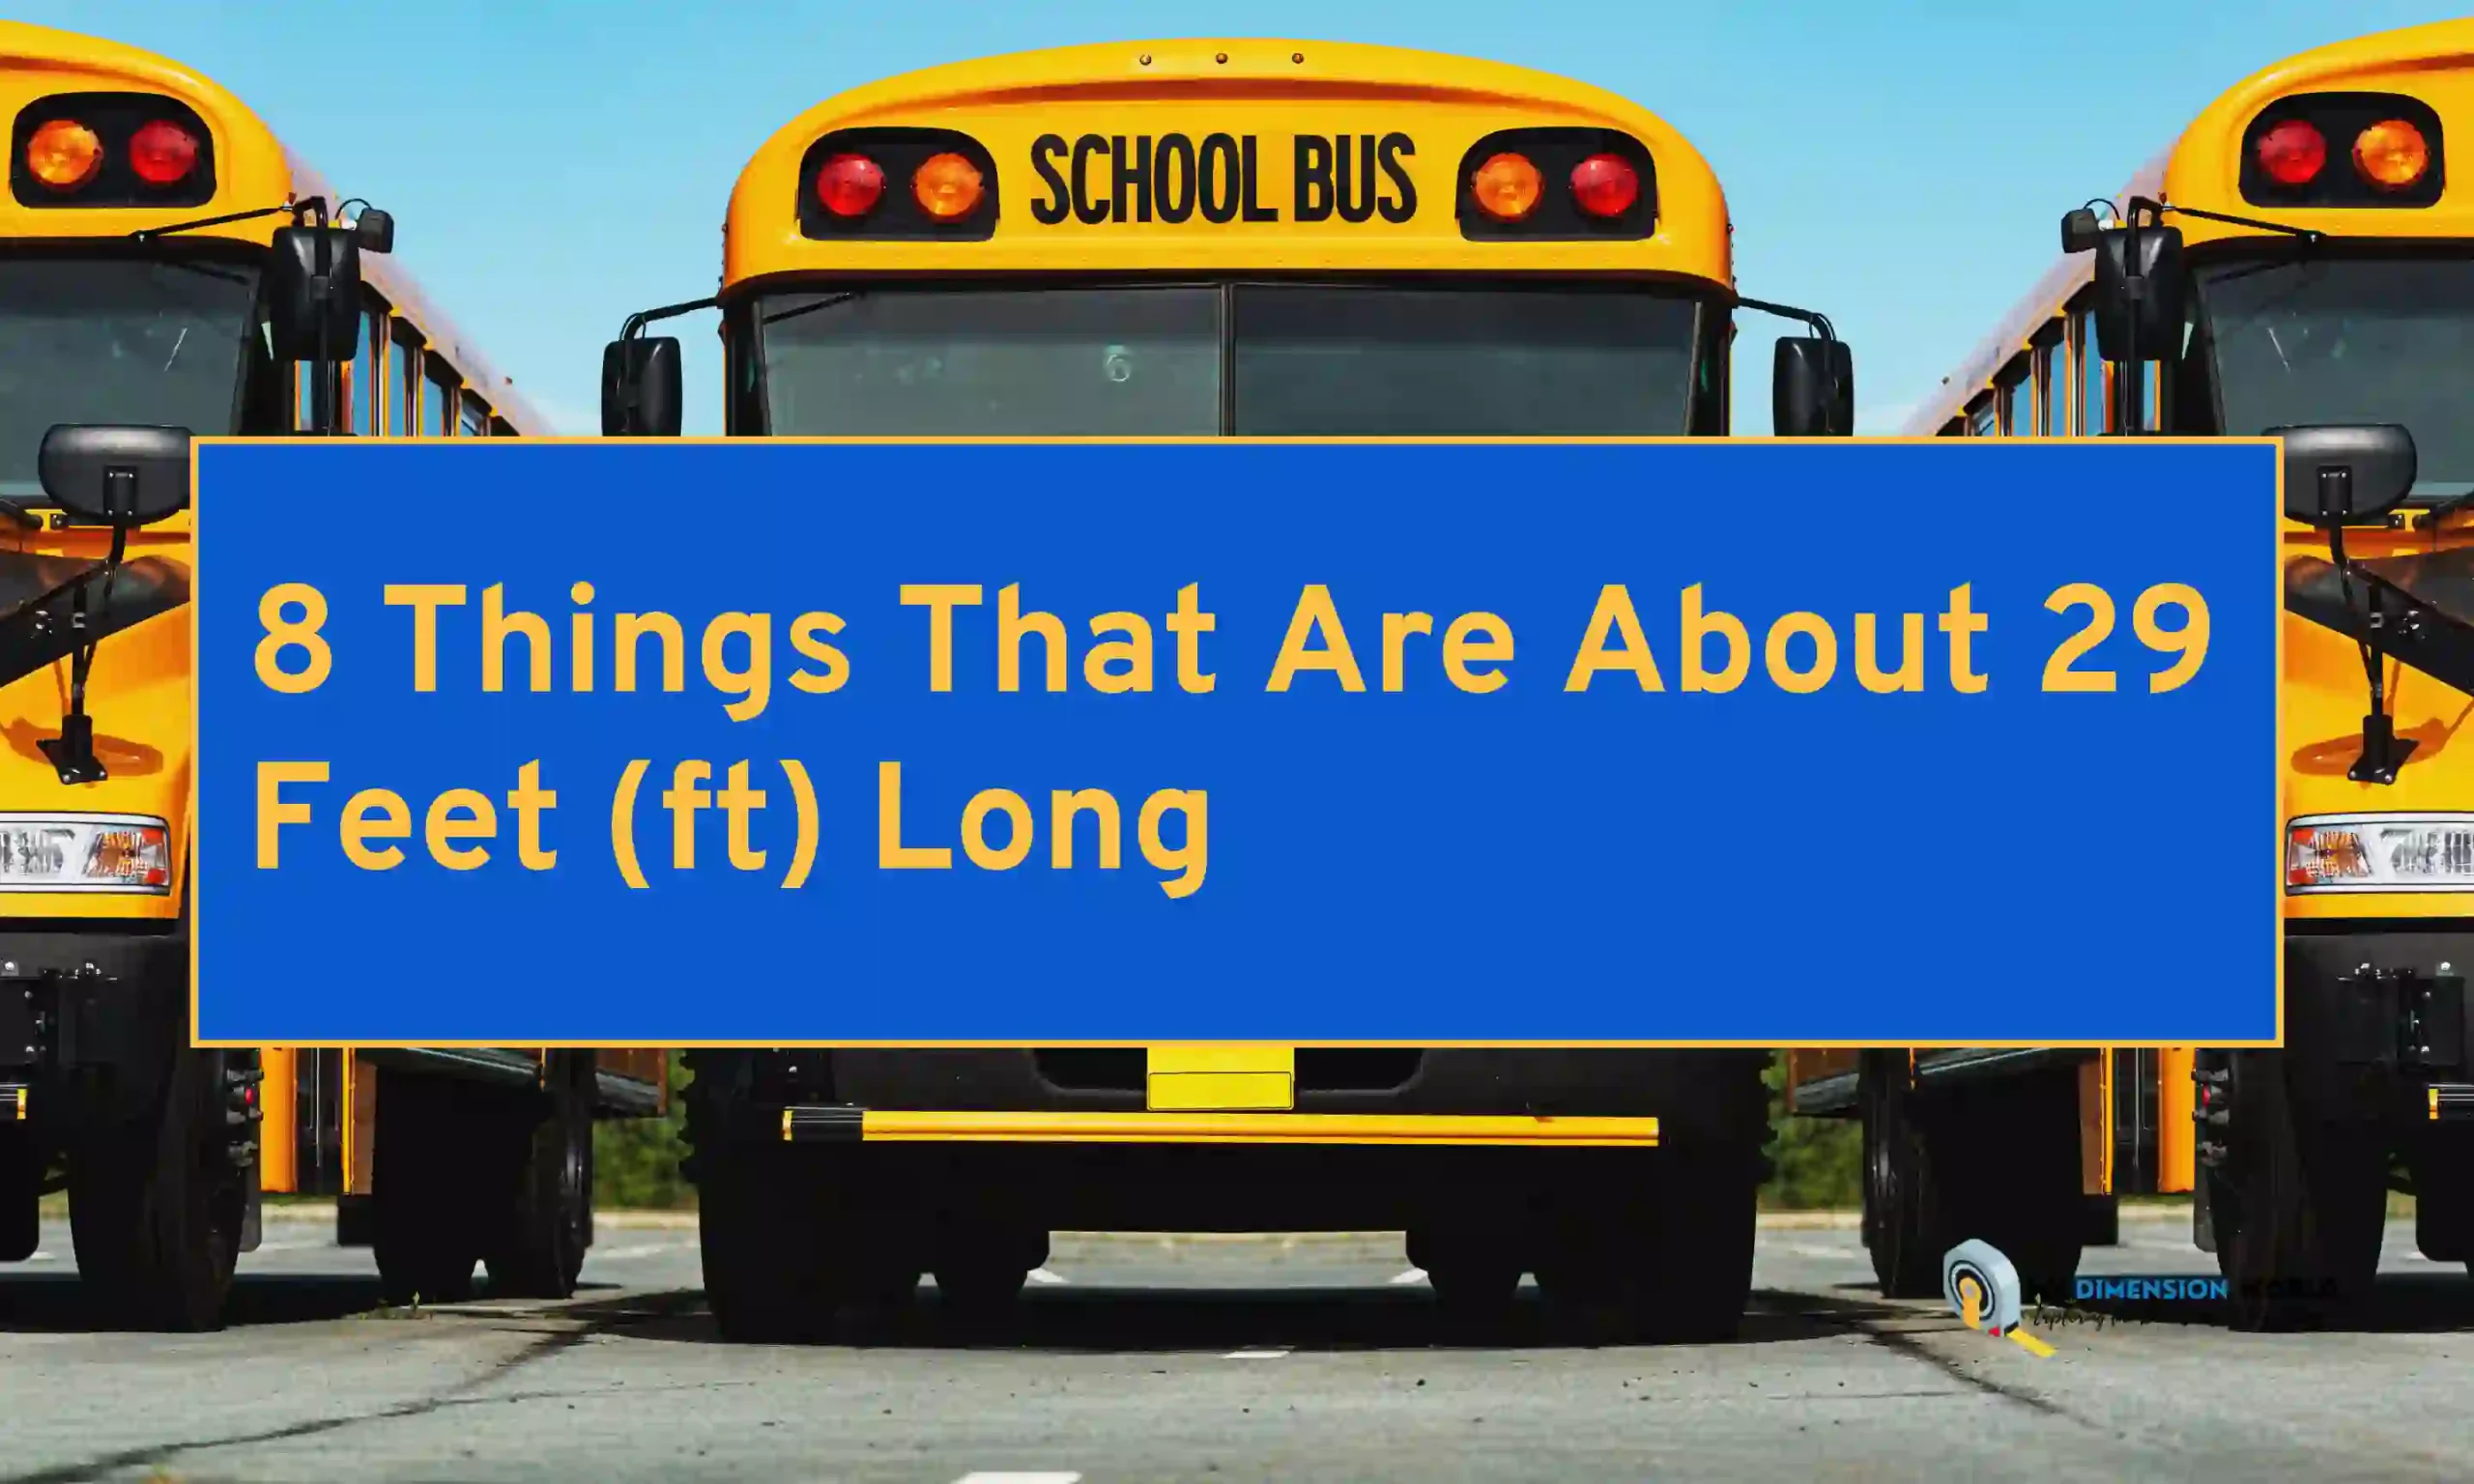 8 Things That Are About 29 Feet (ft) Long